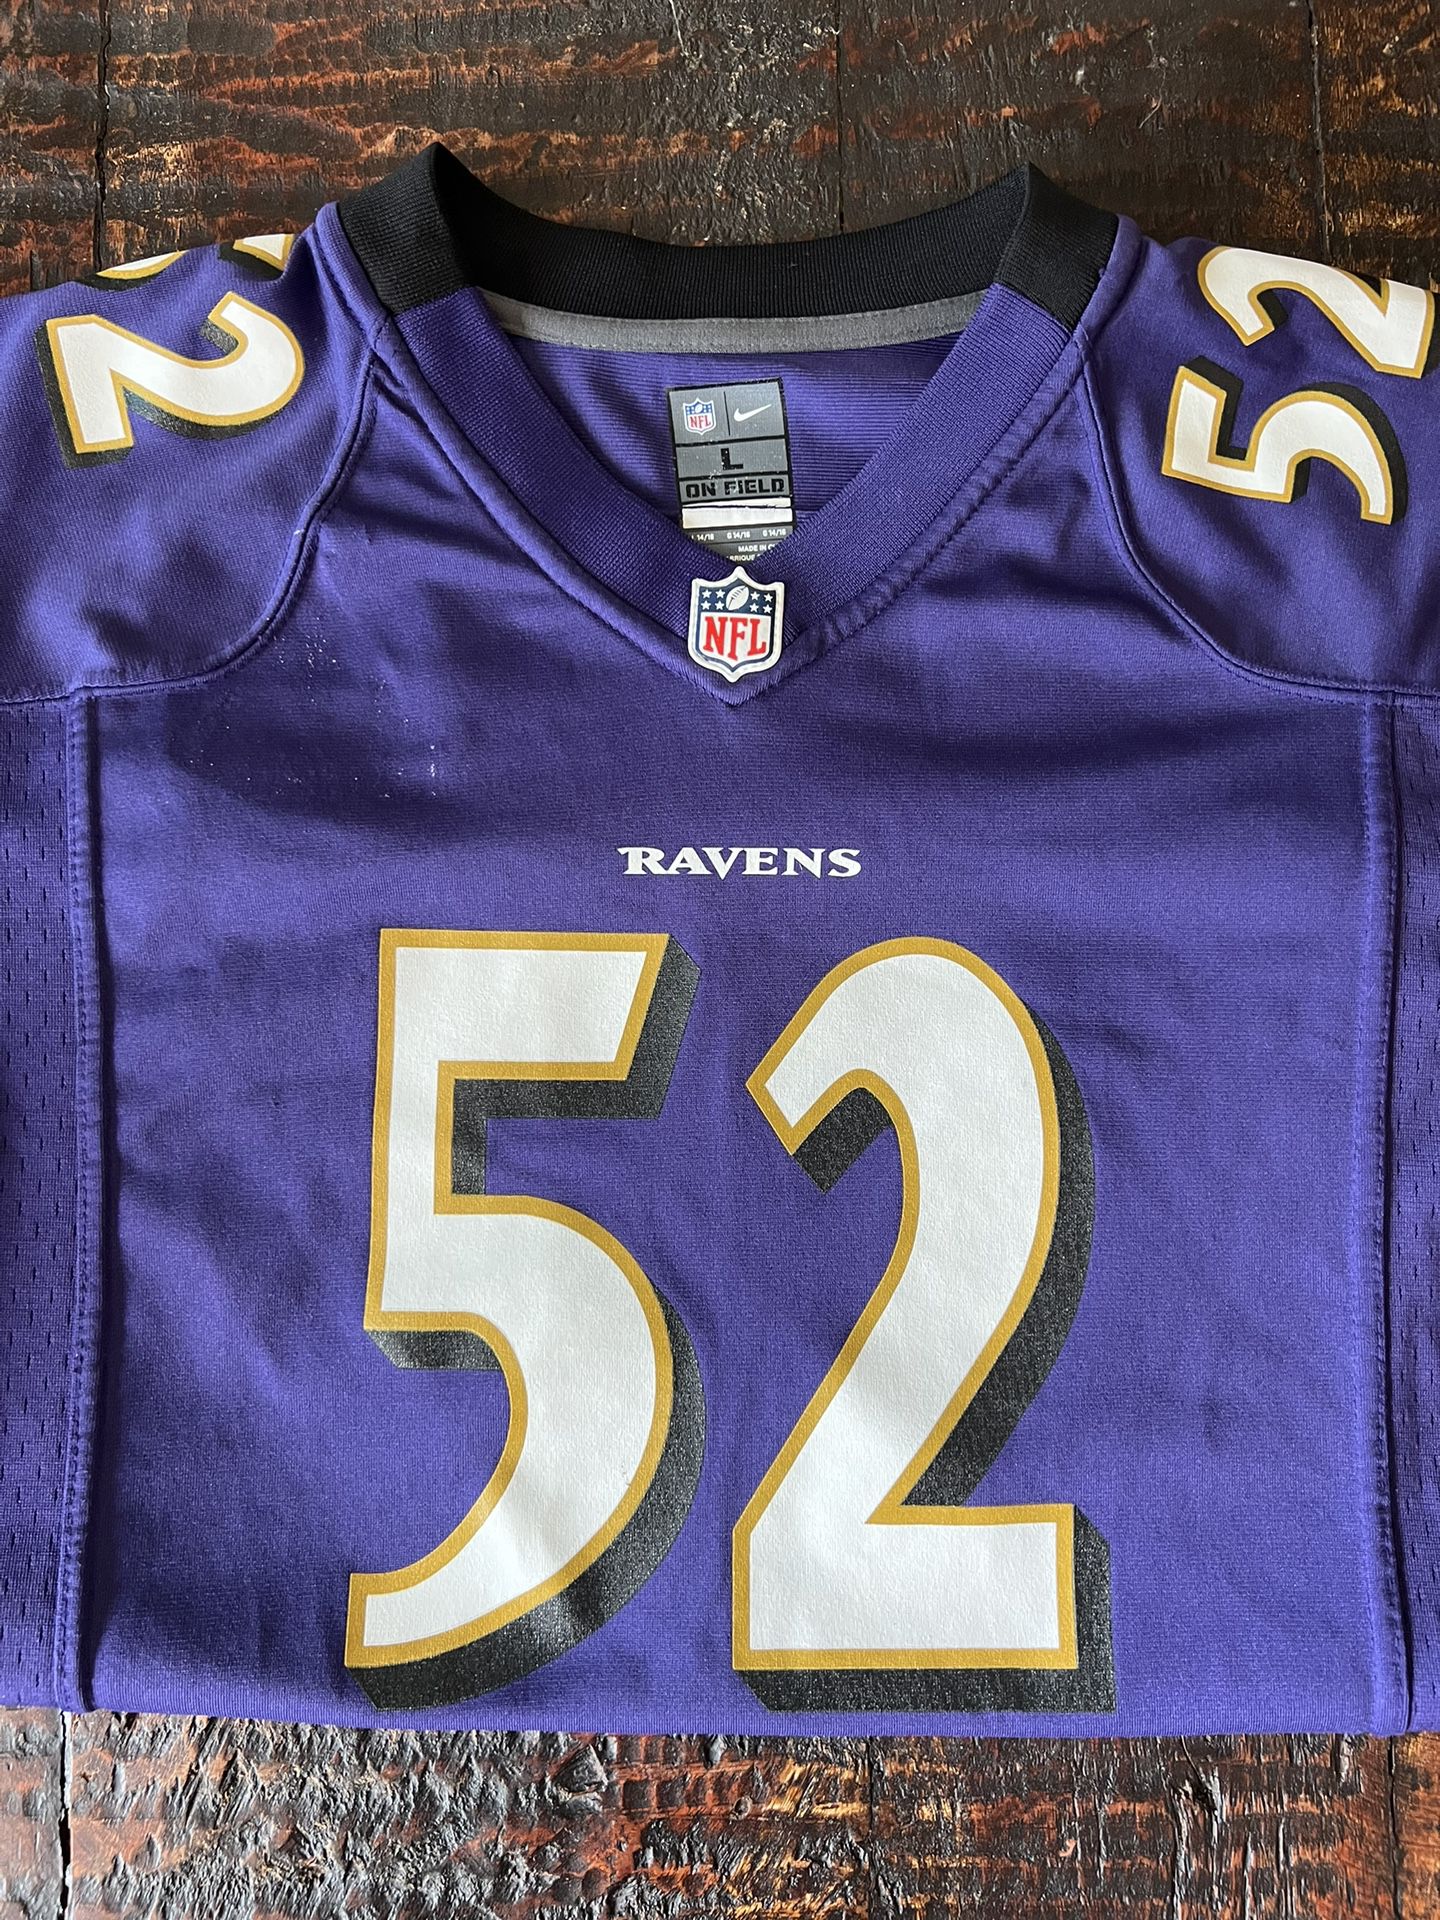 Ray Lewis Jersey